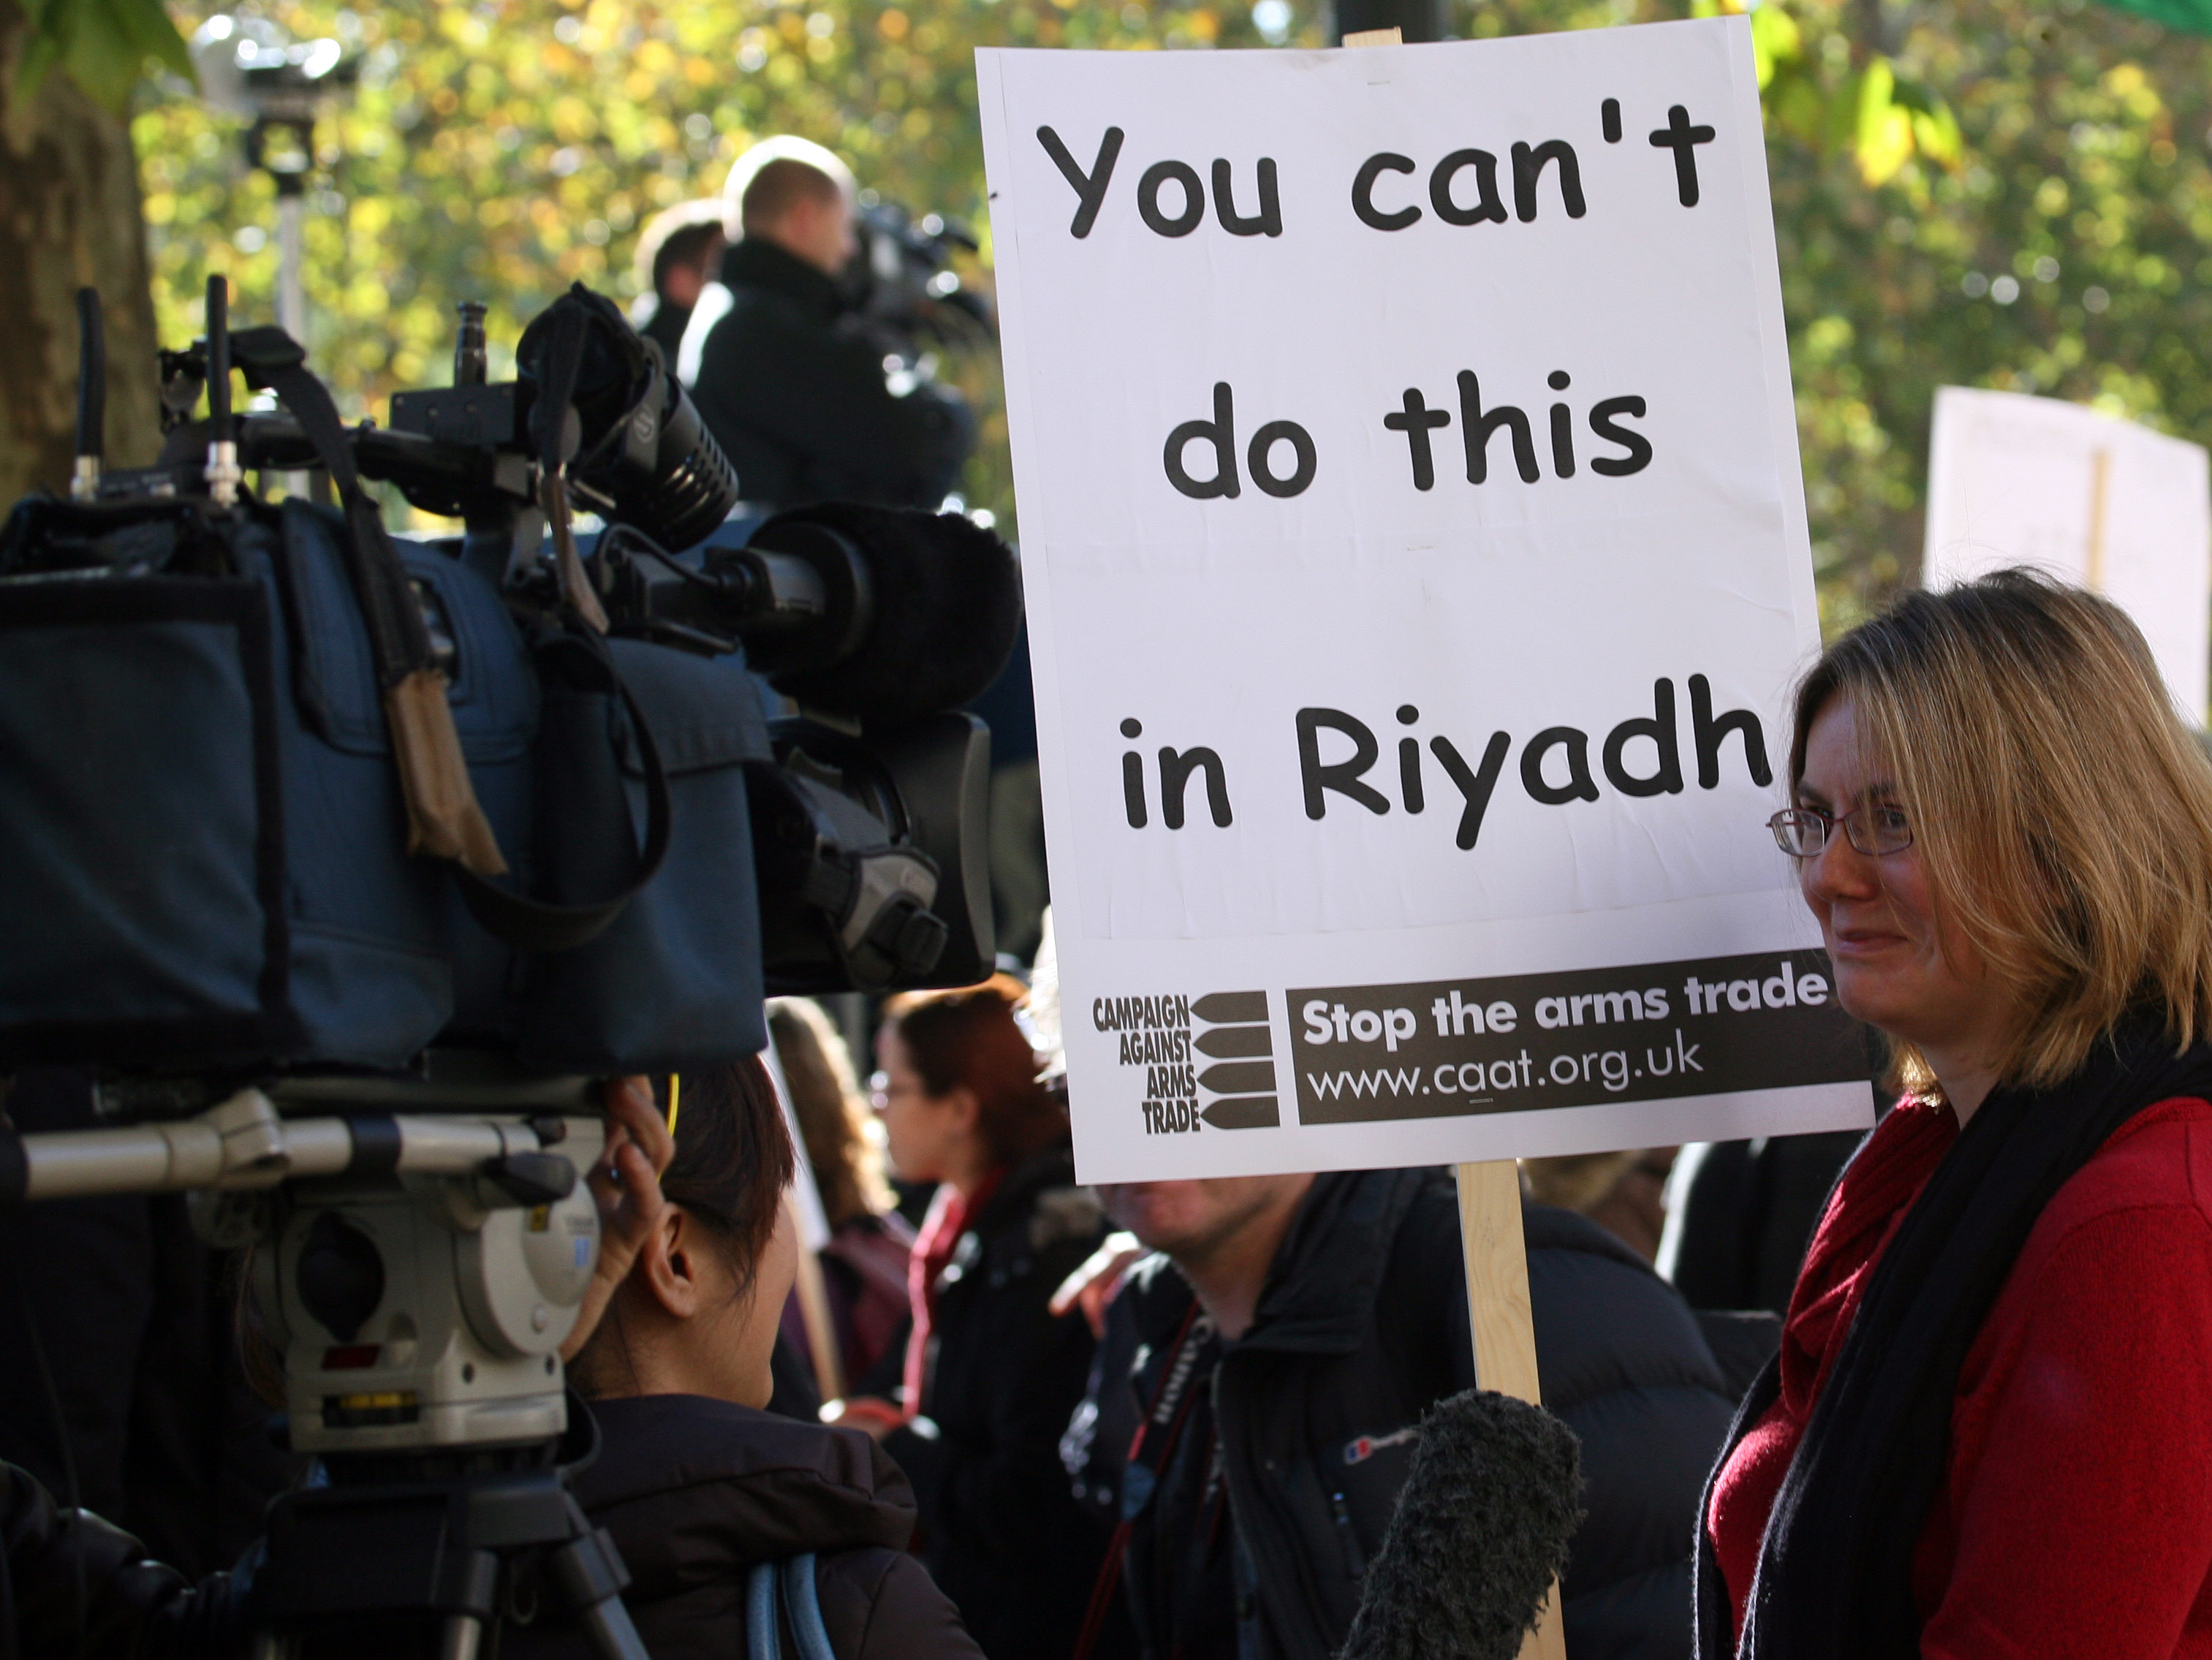 A protester holds a CAAT placard saying "You can't do this in Riyadh".